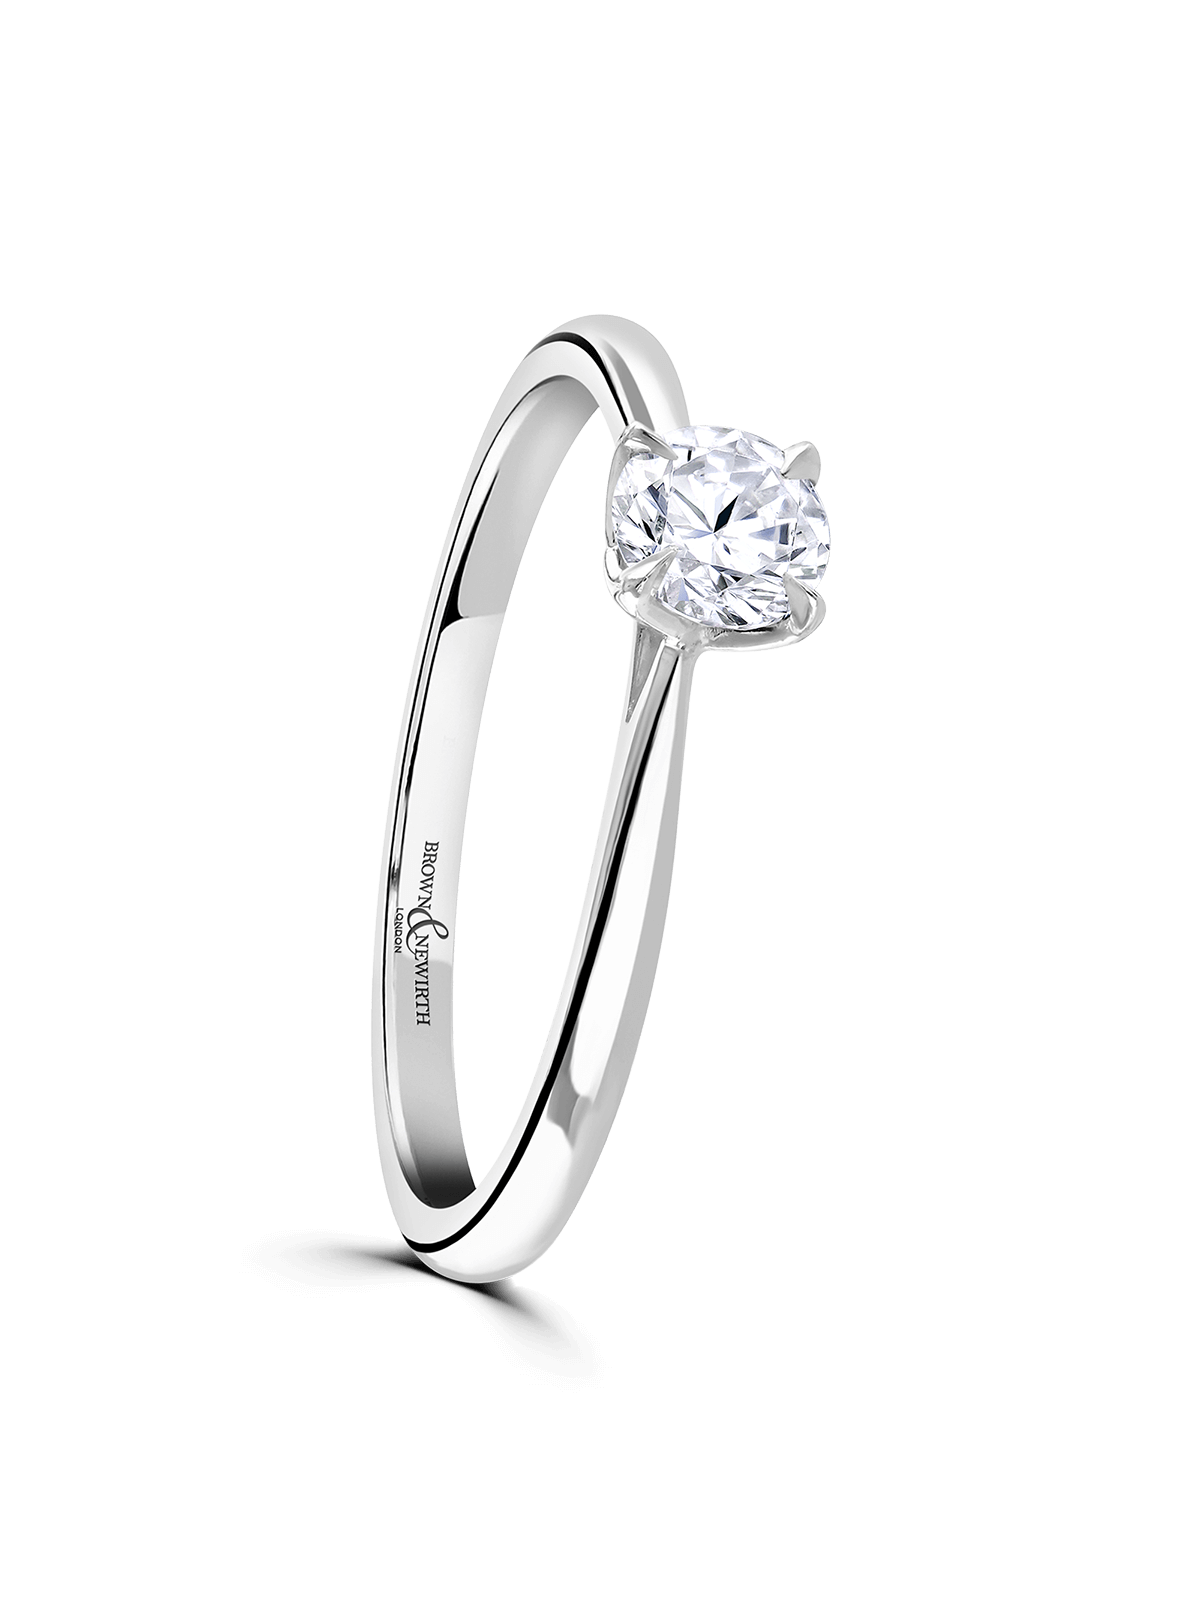 Brown & Newirth Magnolia 0.33ct Brilliant Cut Certificated Diamond Solitaire Engagement Ring in 9ct White Gold